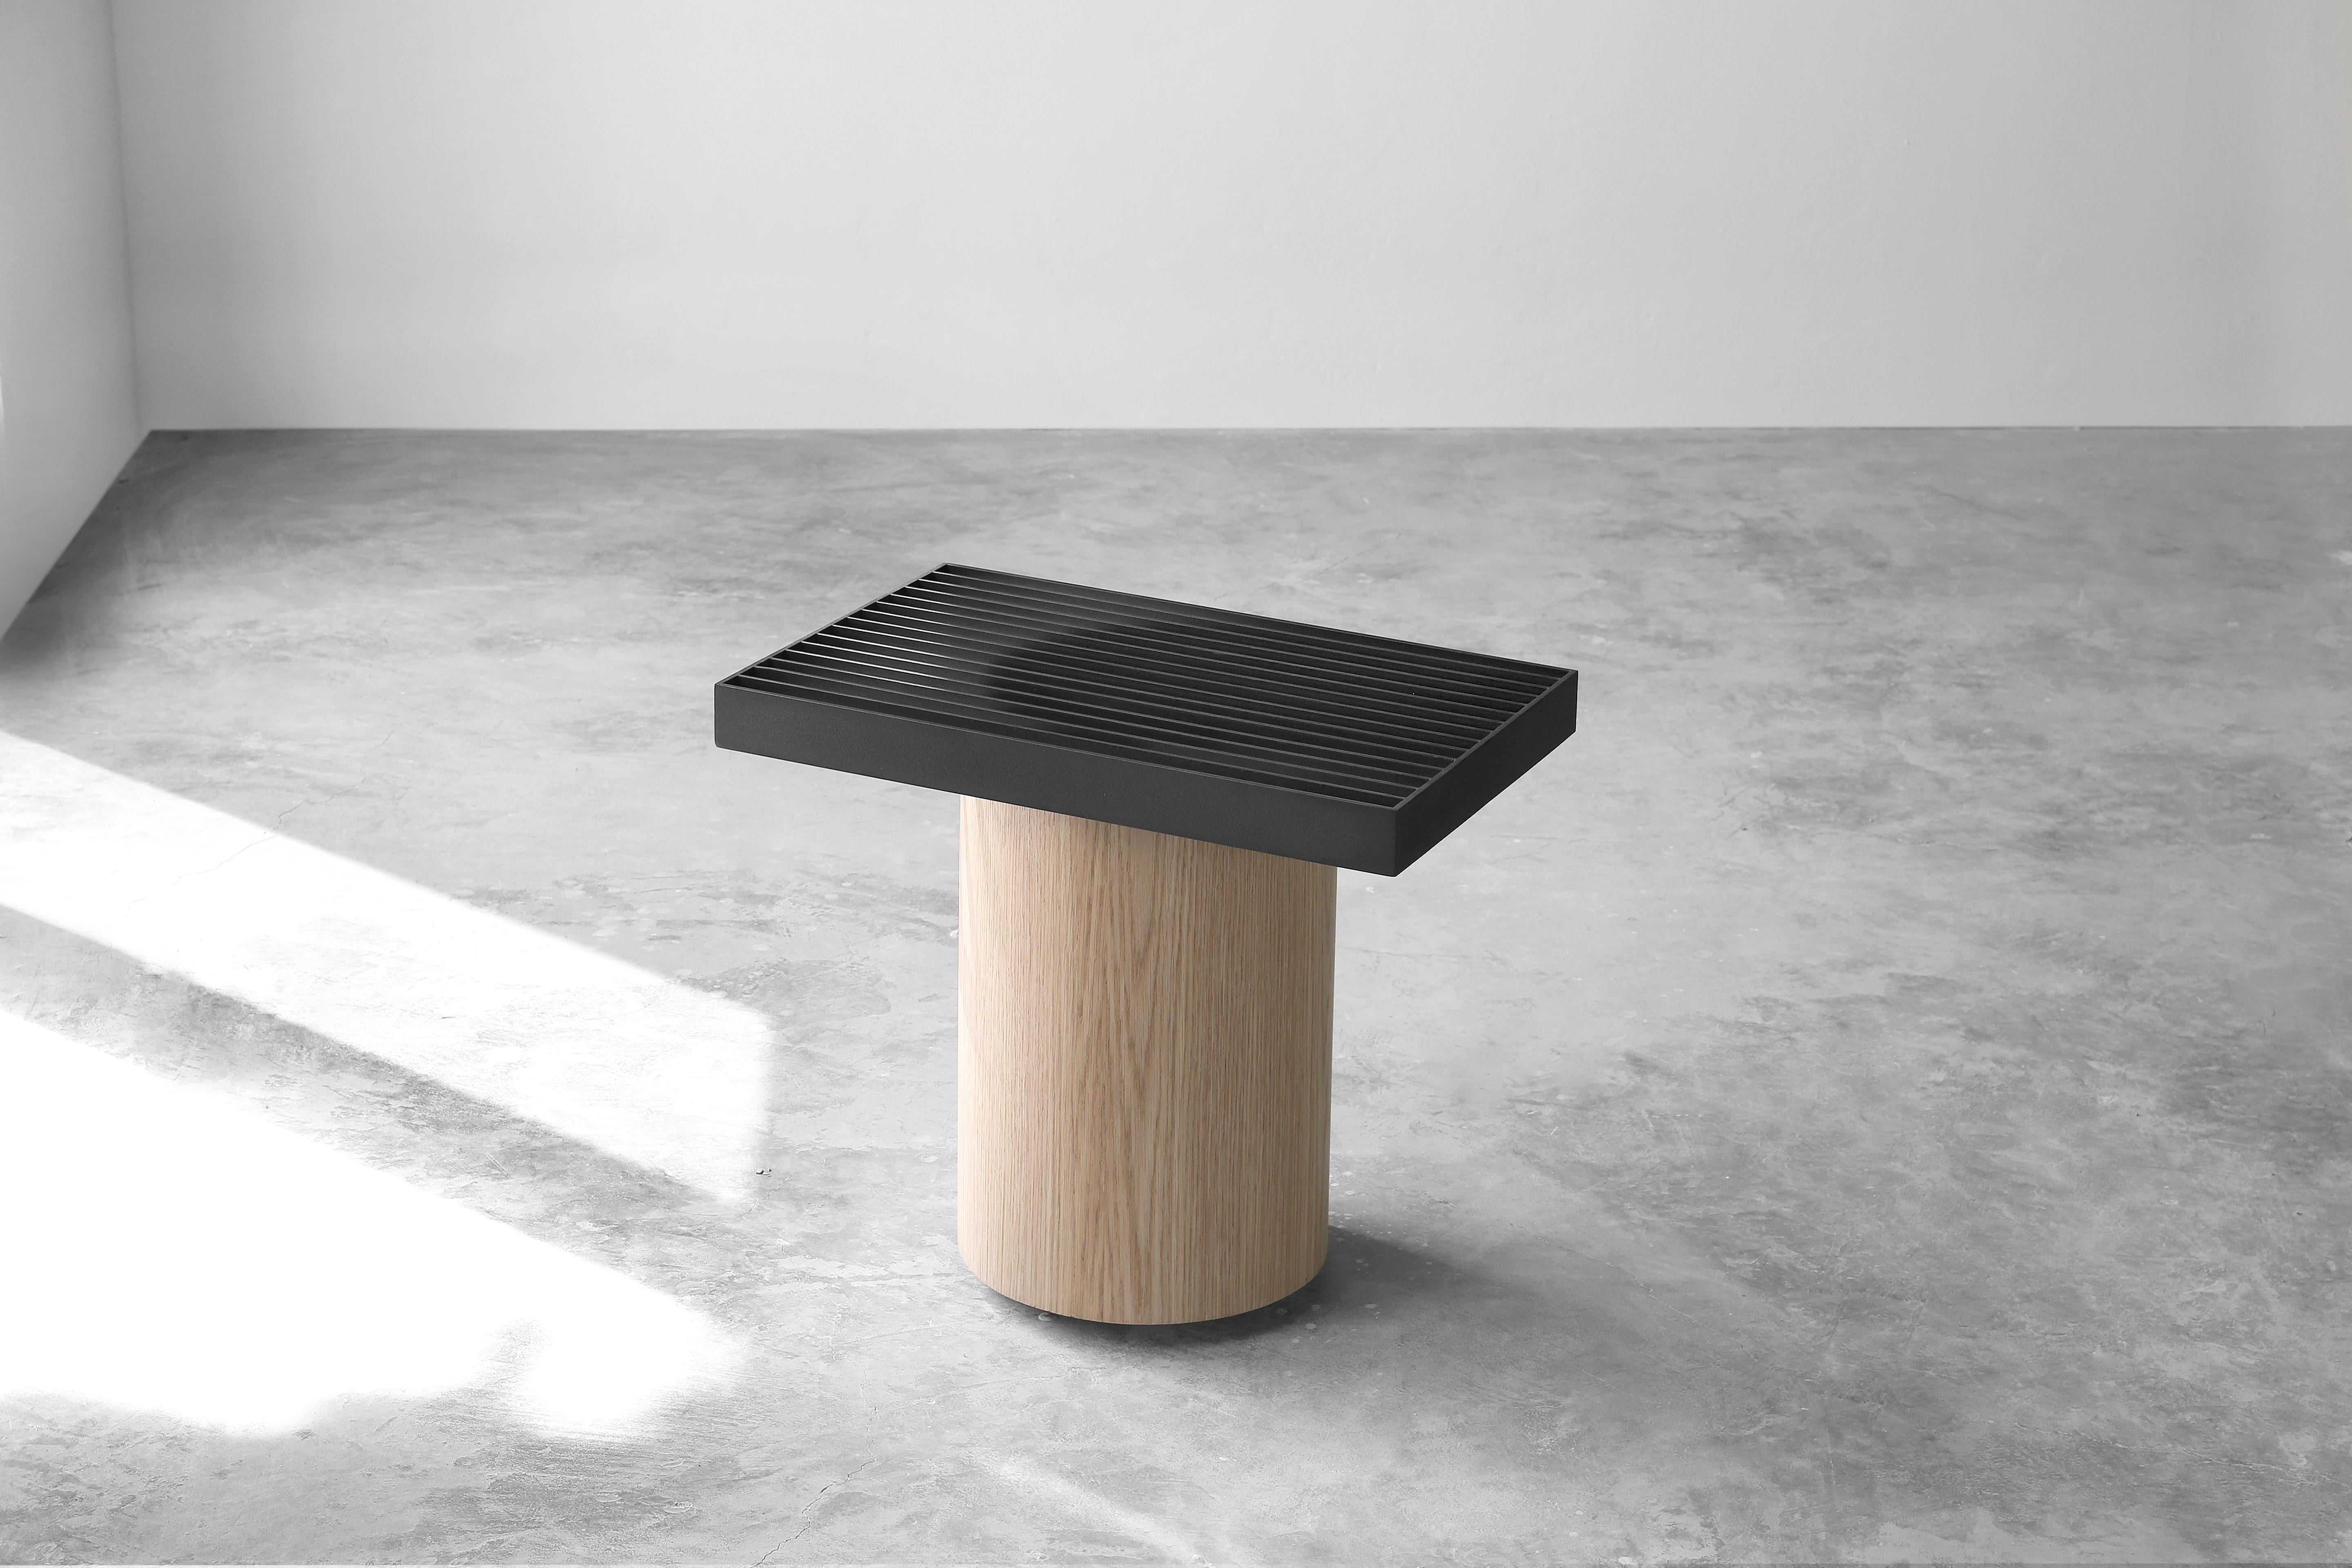 Movimiento side table by Joel Escalona
Limited edition of 9
Dimensions: D 55 x W 55 x H 47 cm
Materials: oak wood, metal.

Natural white oak with metal table.

Joel Escalona
He was born in Mexico City and studied Industrial Design at the